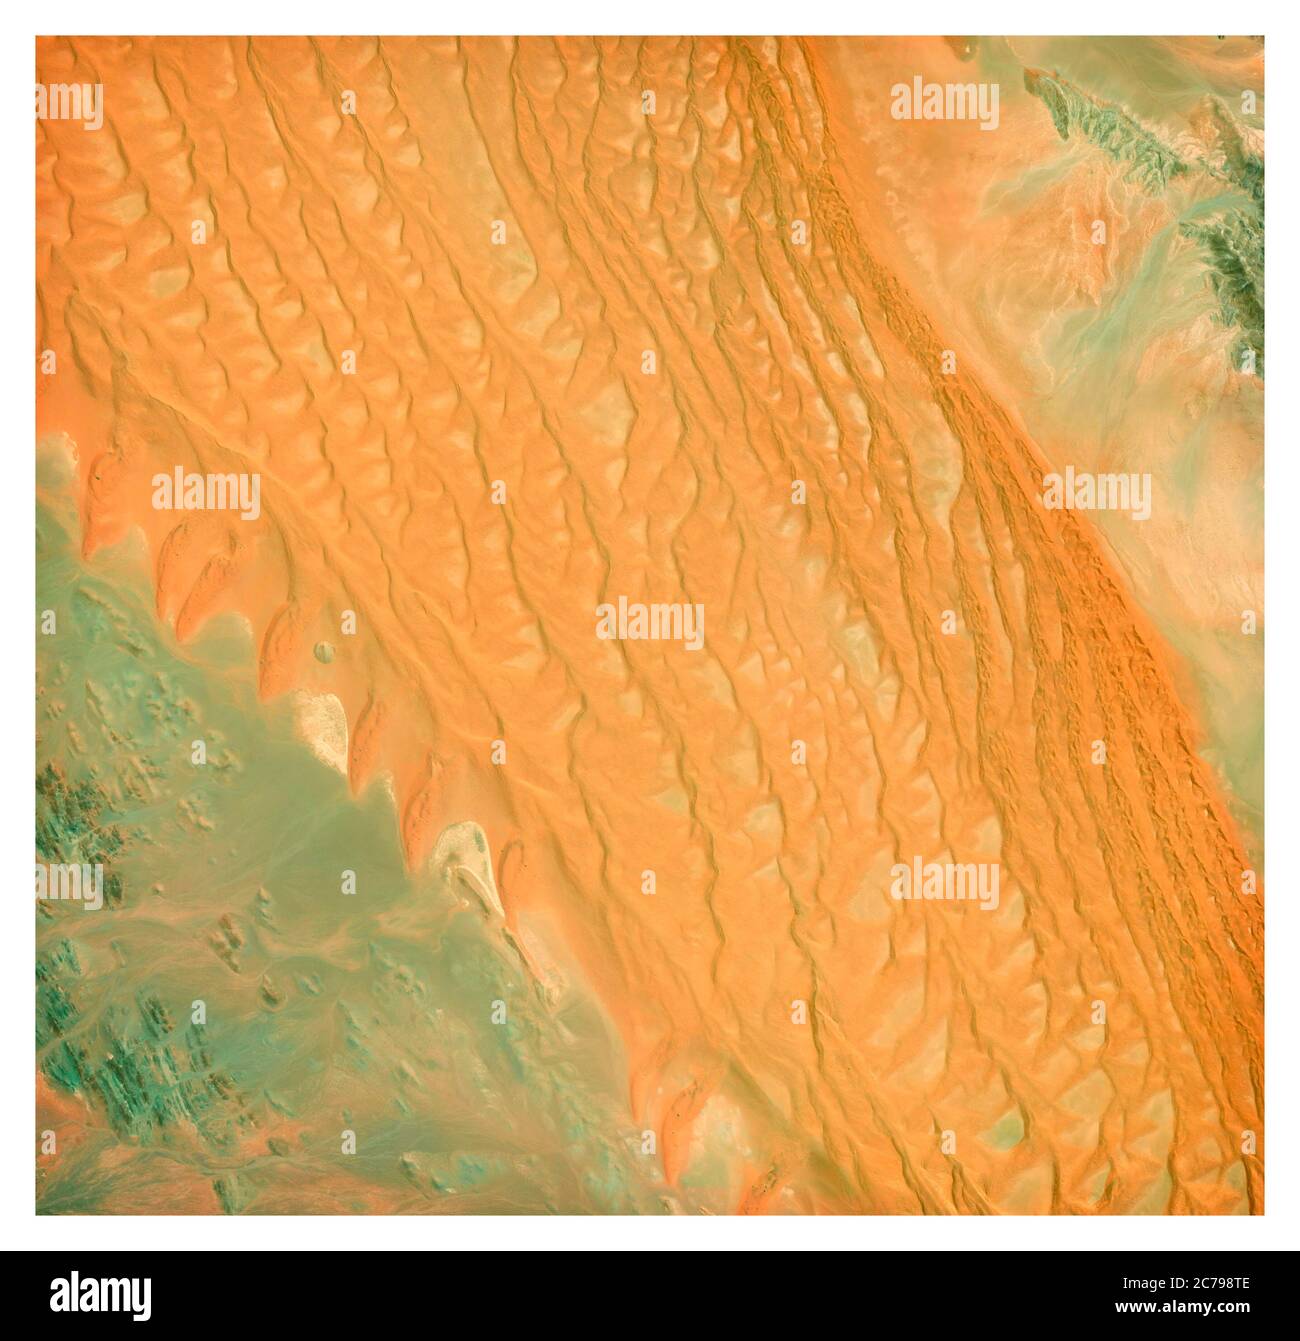 Satellite view of Namibia desert, landscape and mountains. Nature and aerial view. Flower shapes. Global warming and climate change Stock Photo